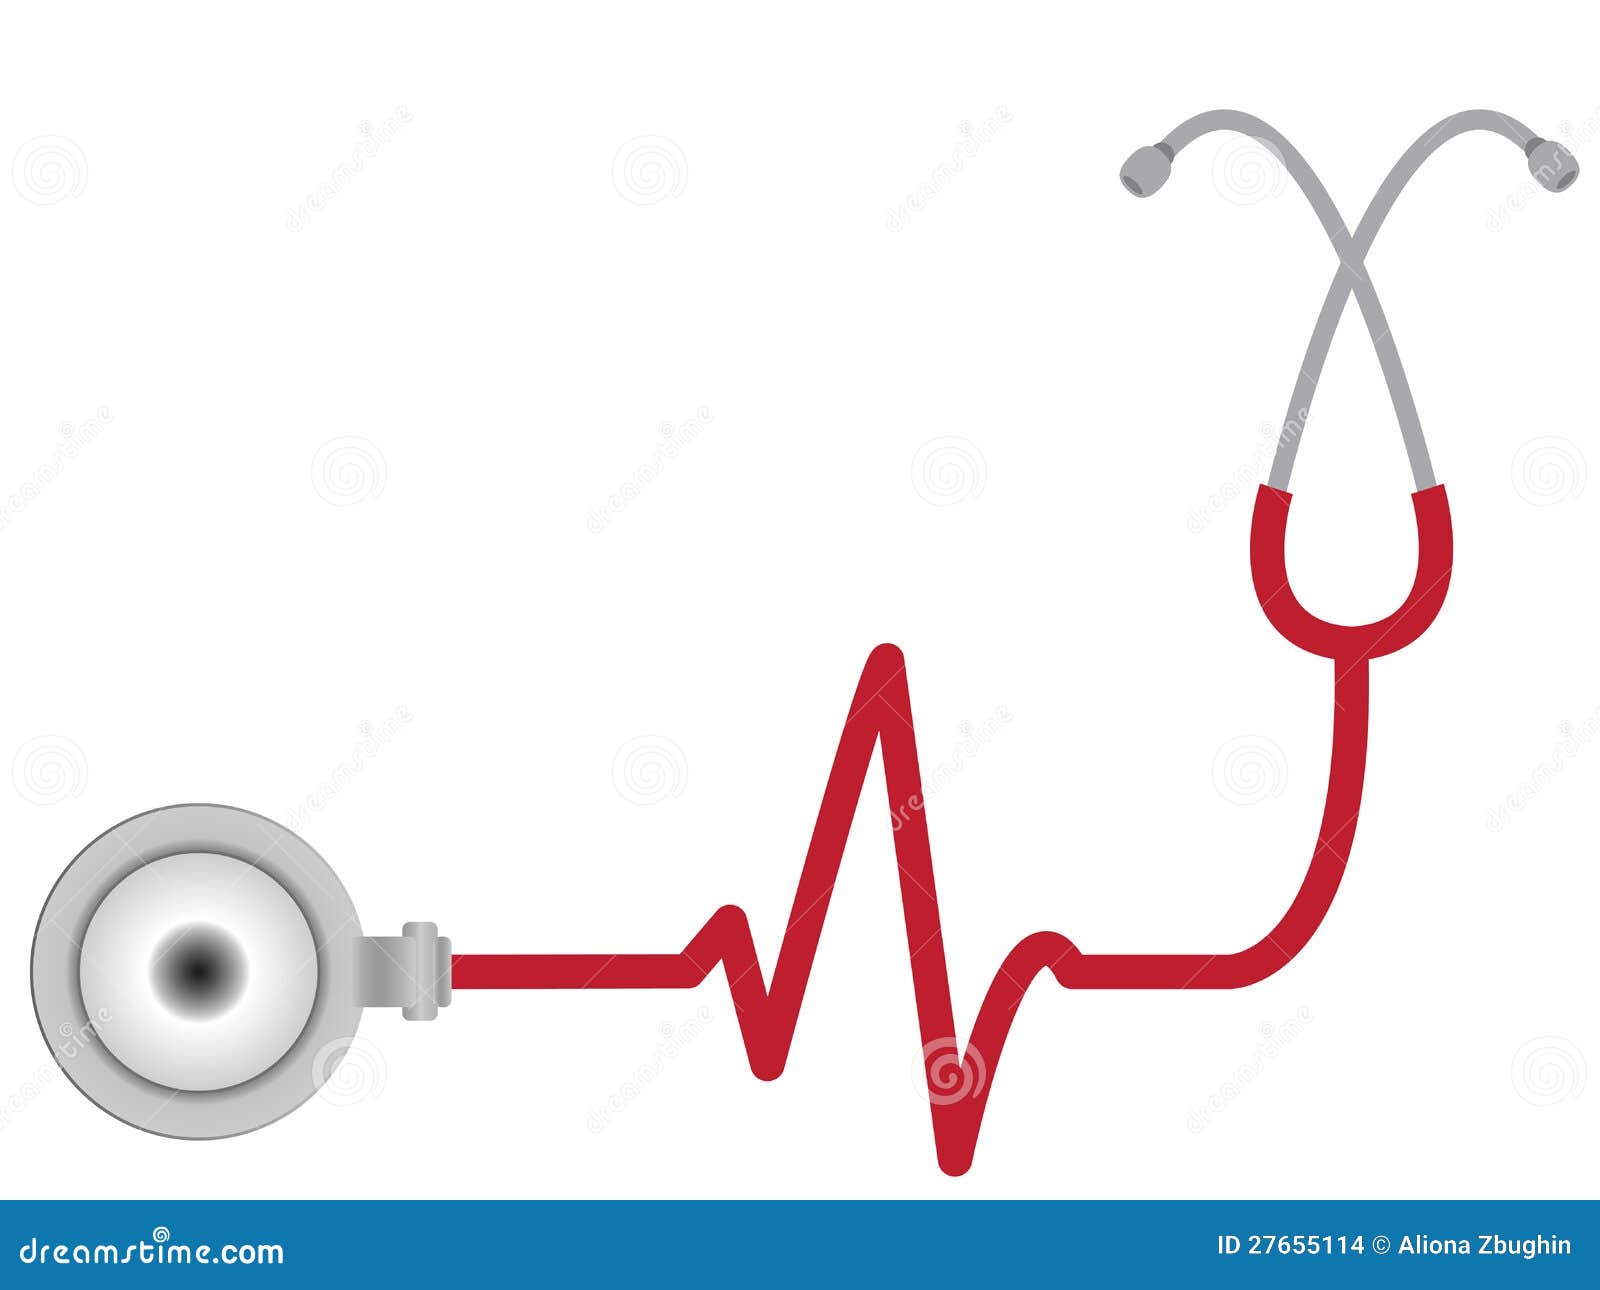 stethoscope with heart beat